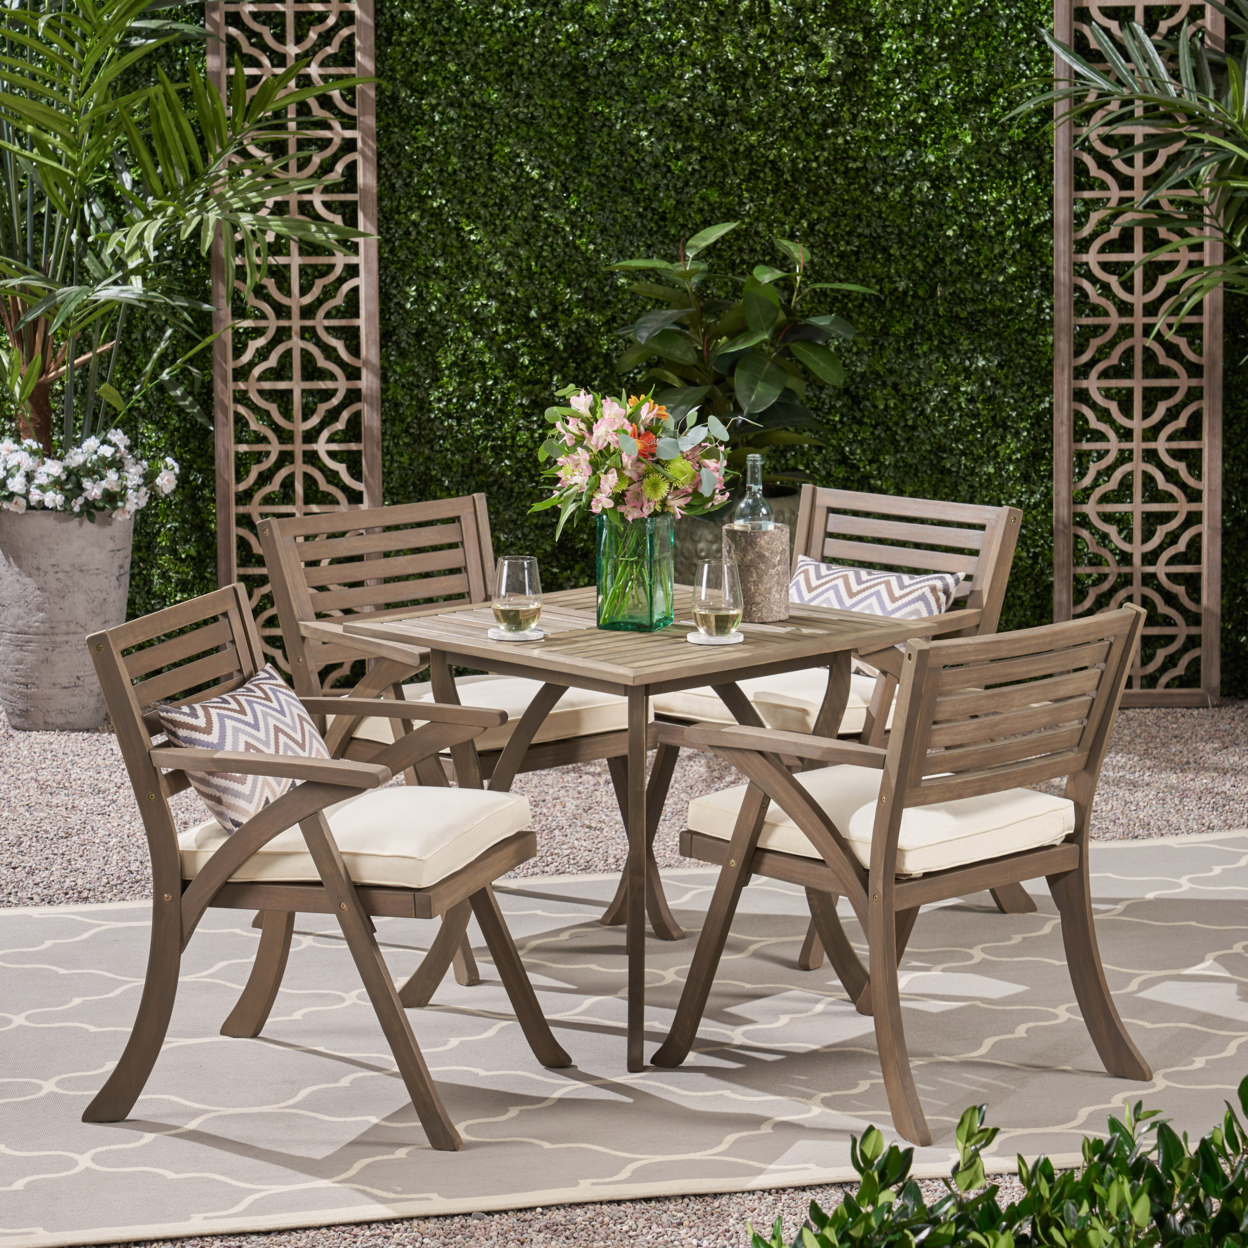 Deandra Outdoor 4-Seater Acacia Wood Dining Set With Square Table - Gray Finish + Creme